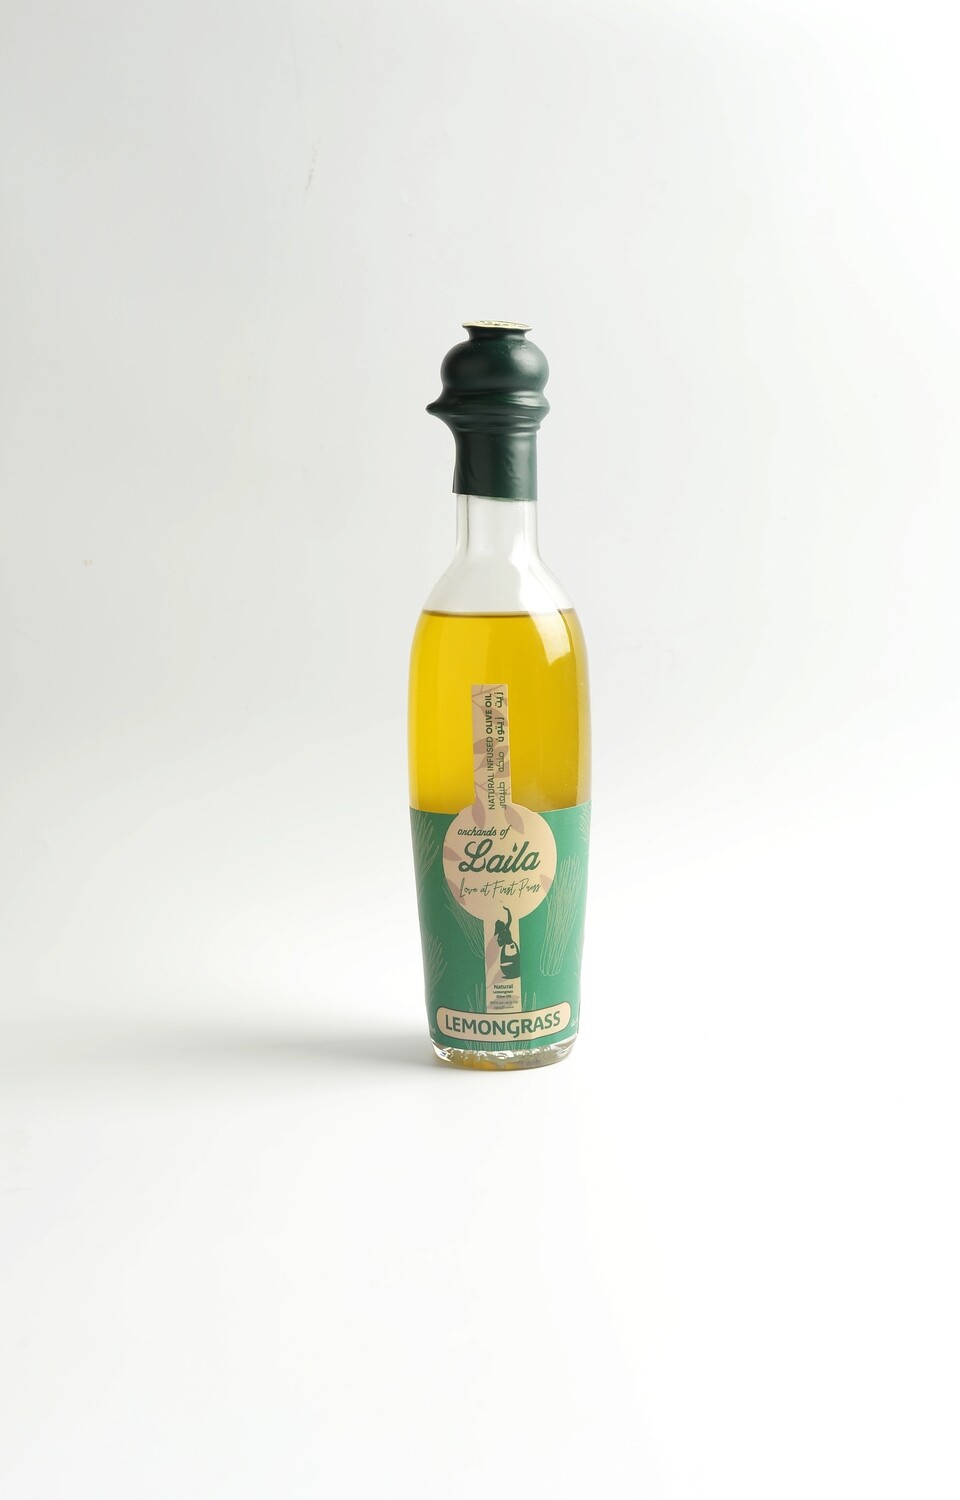 Orchards of Laila Lemongrass Infused Olive Oil